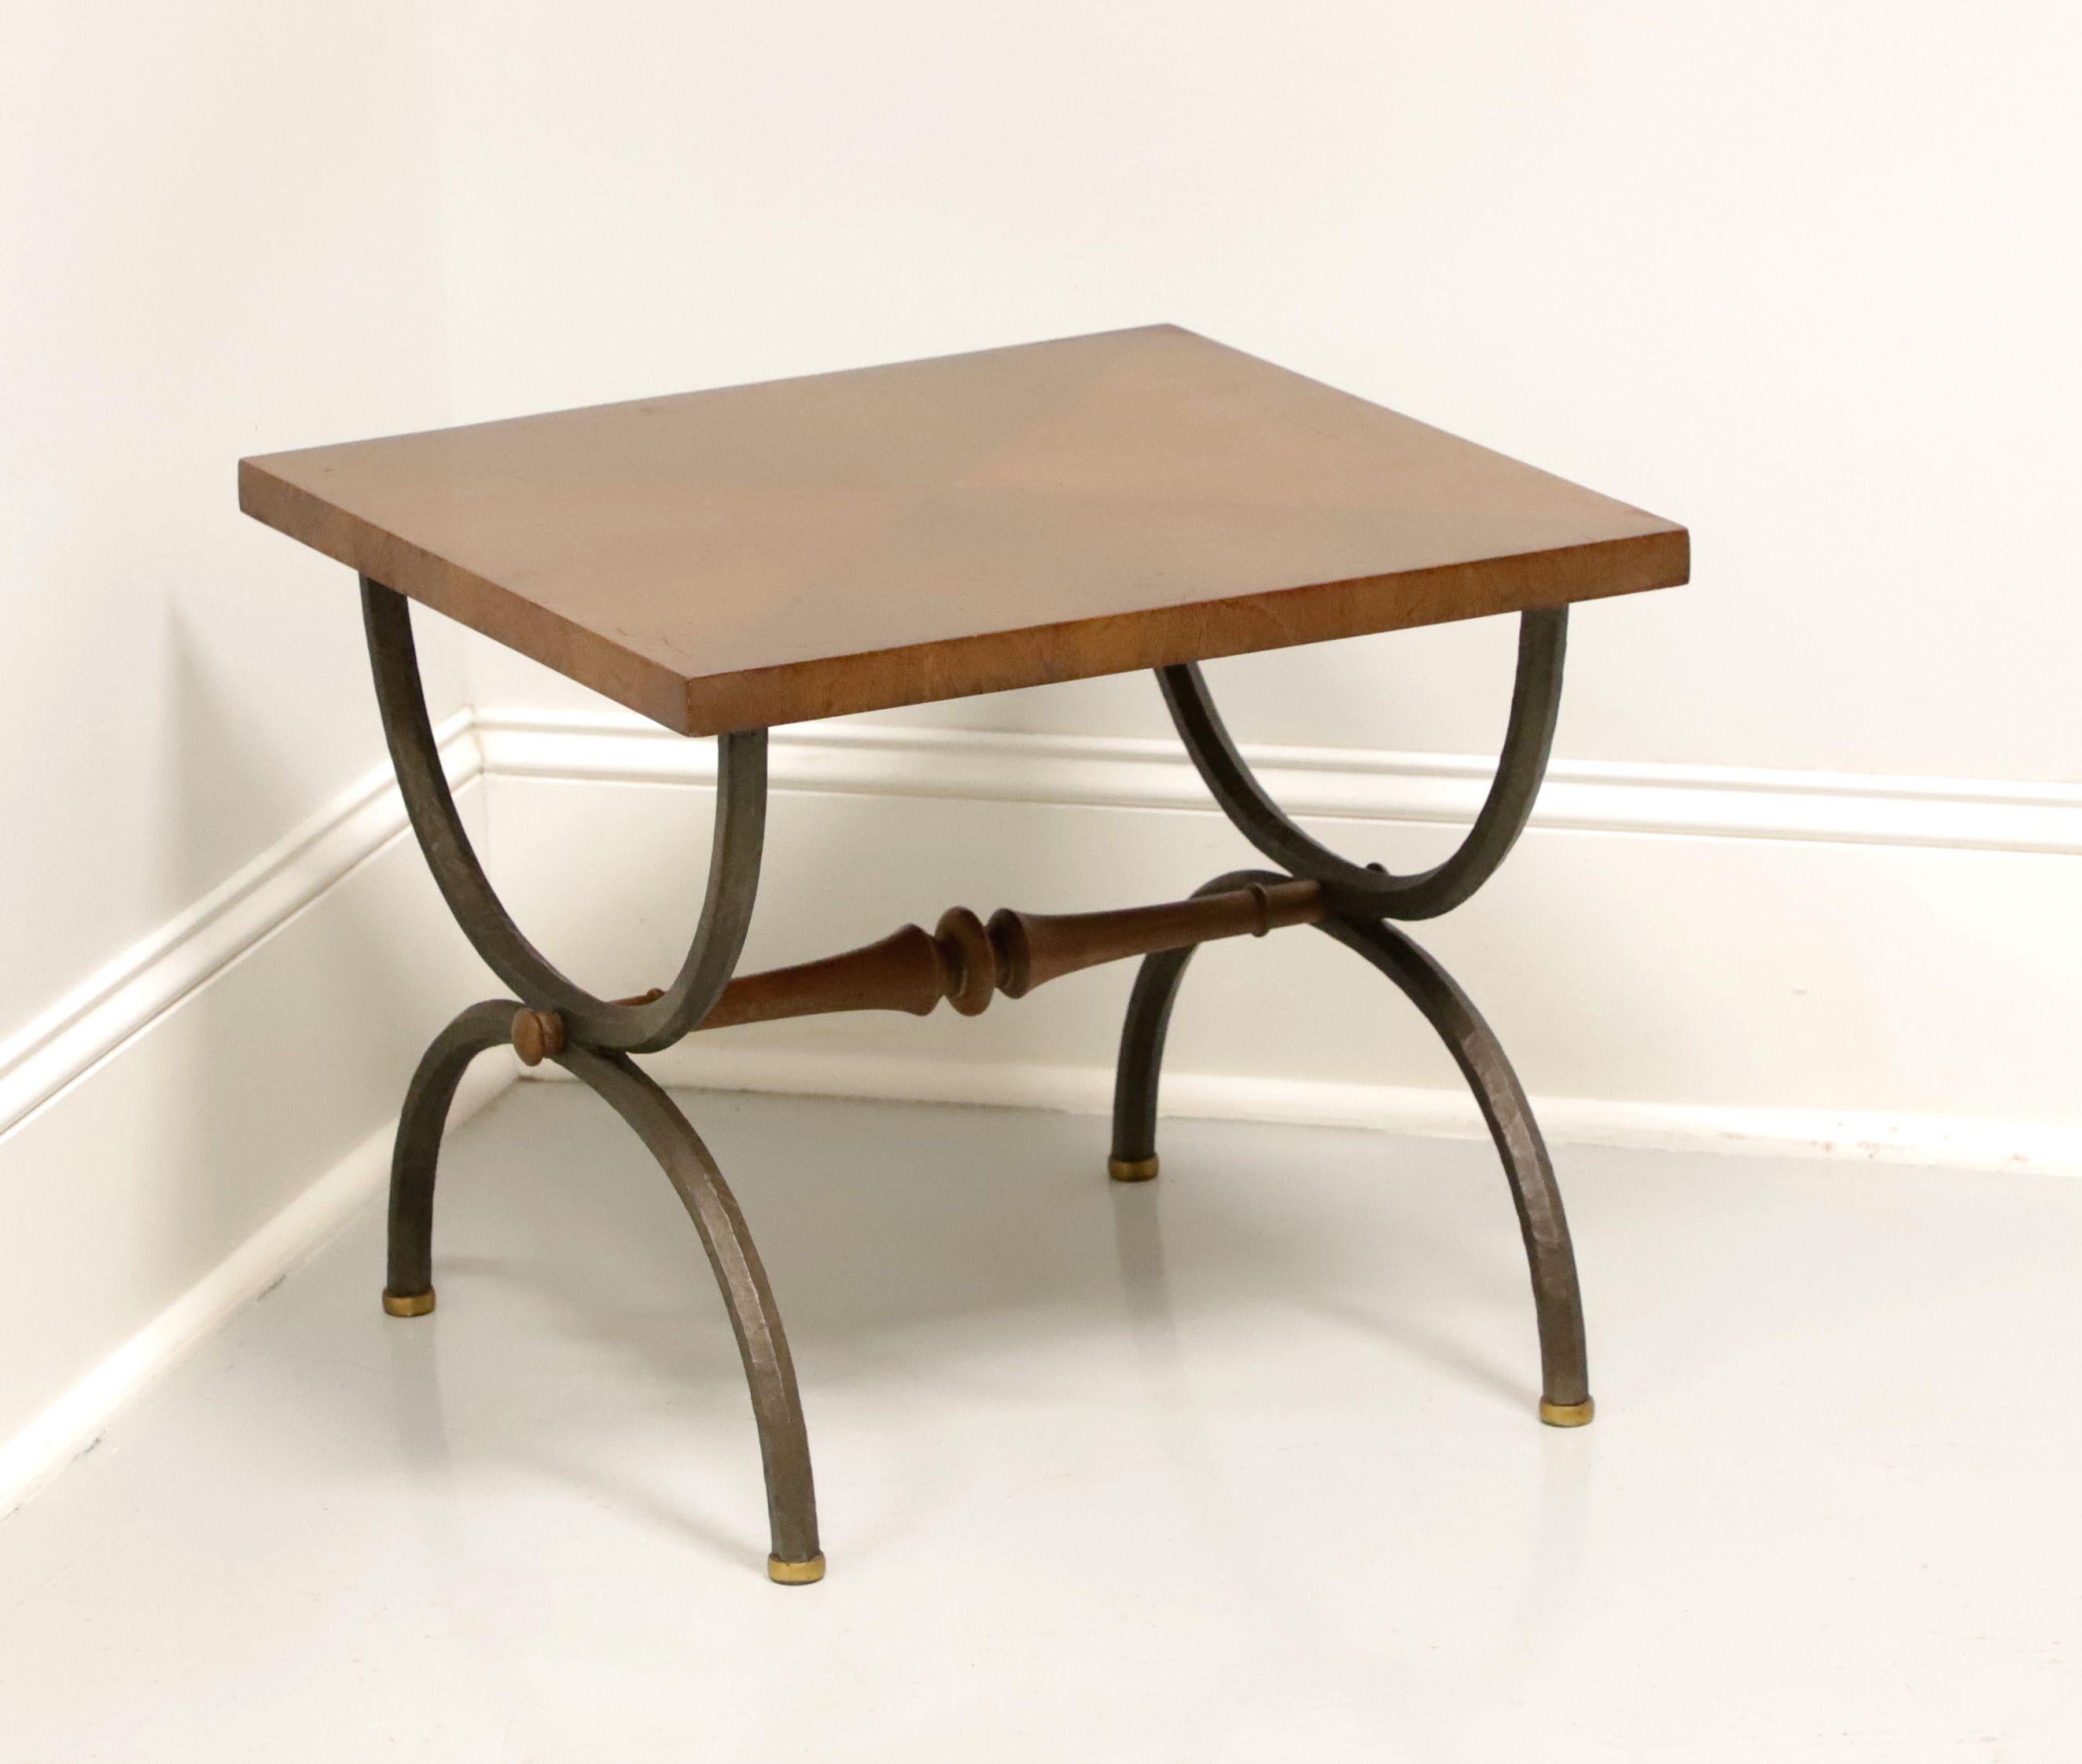 TOMLINSON 1960's Walnut Square Cocktail Table with Metal Legs - A For Sale 2